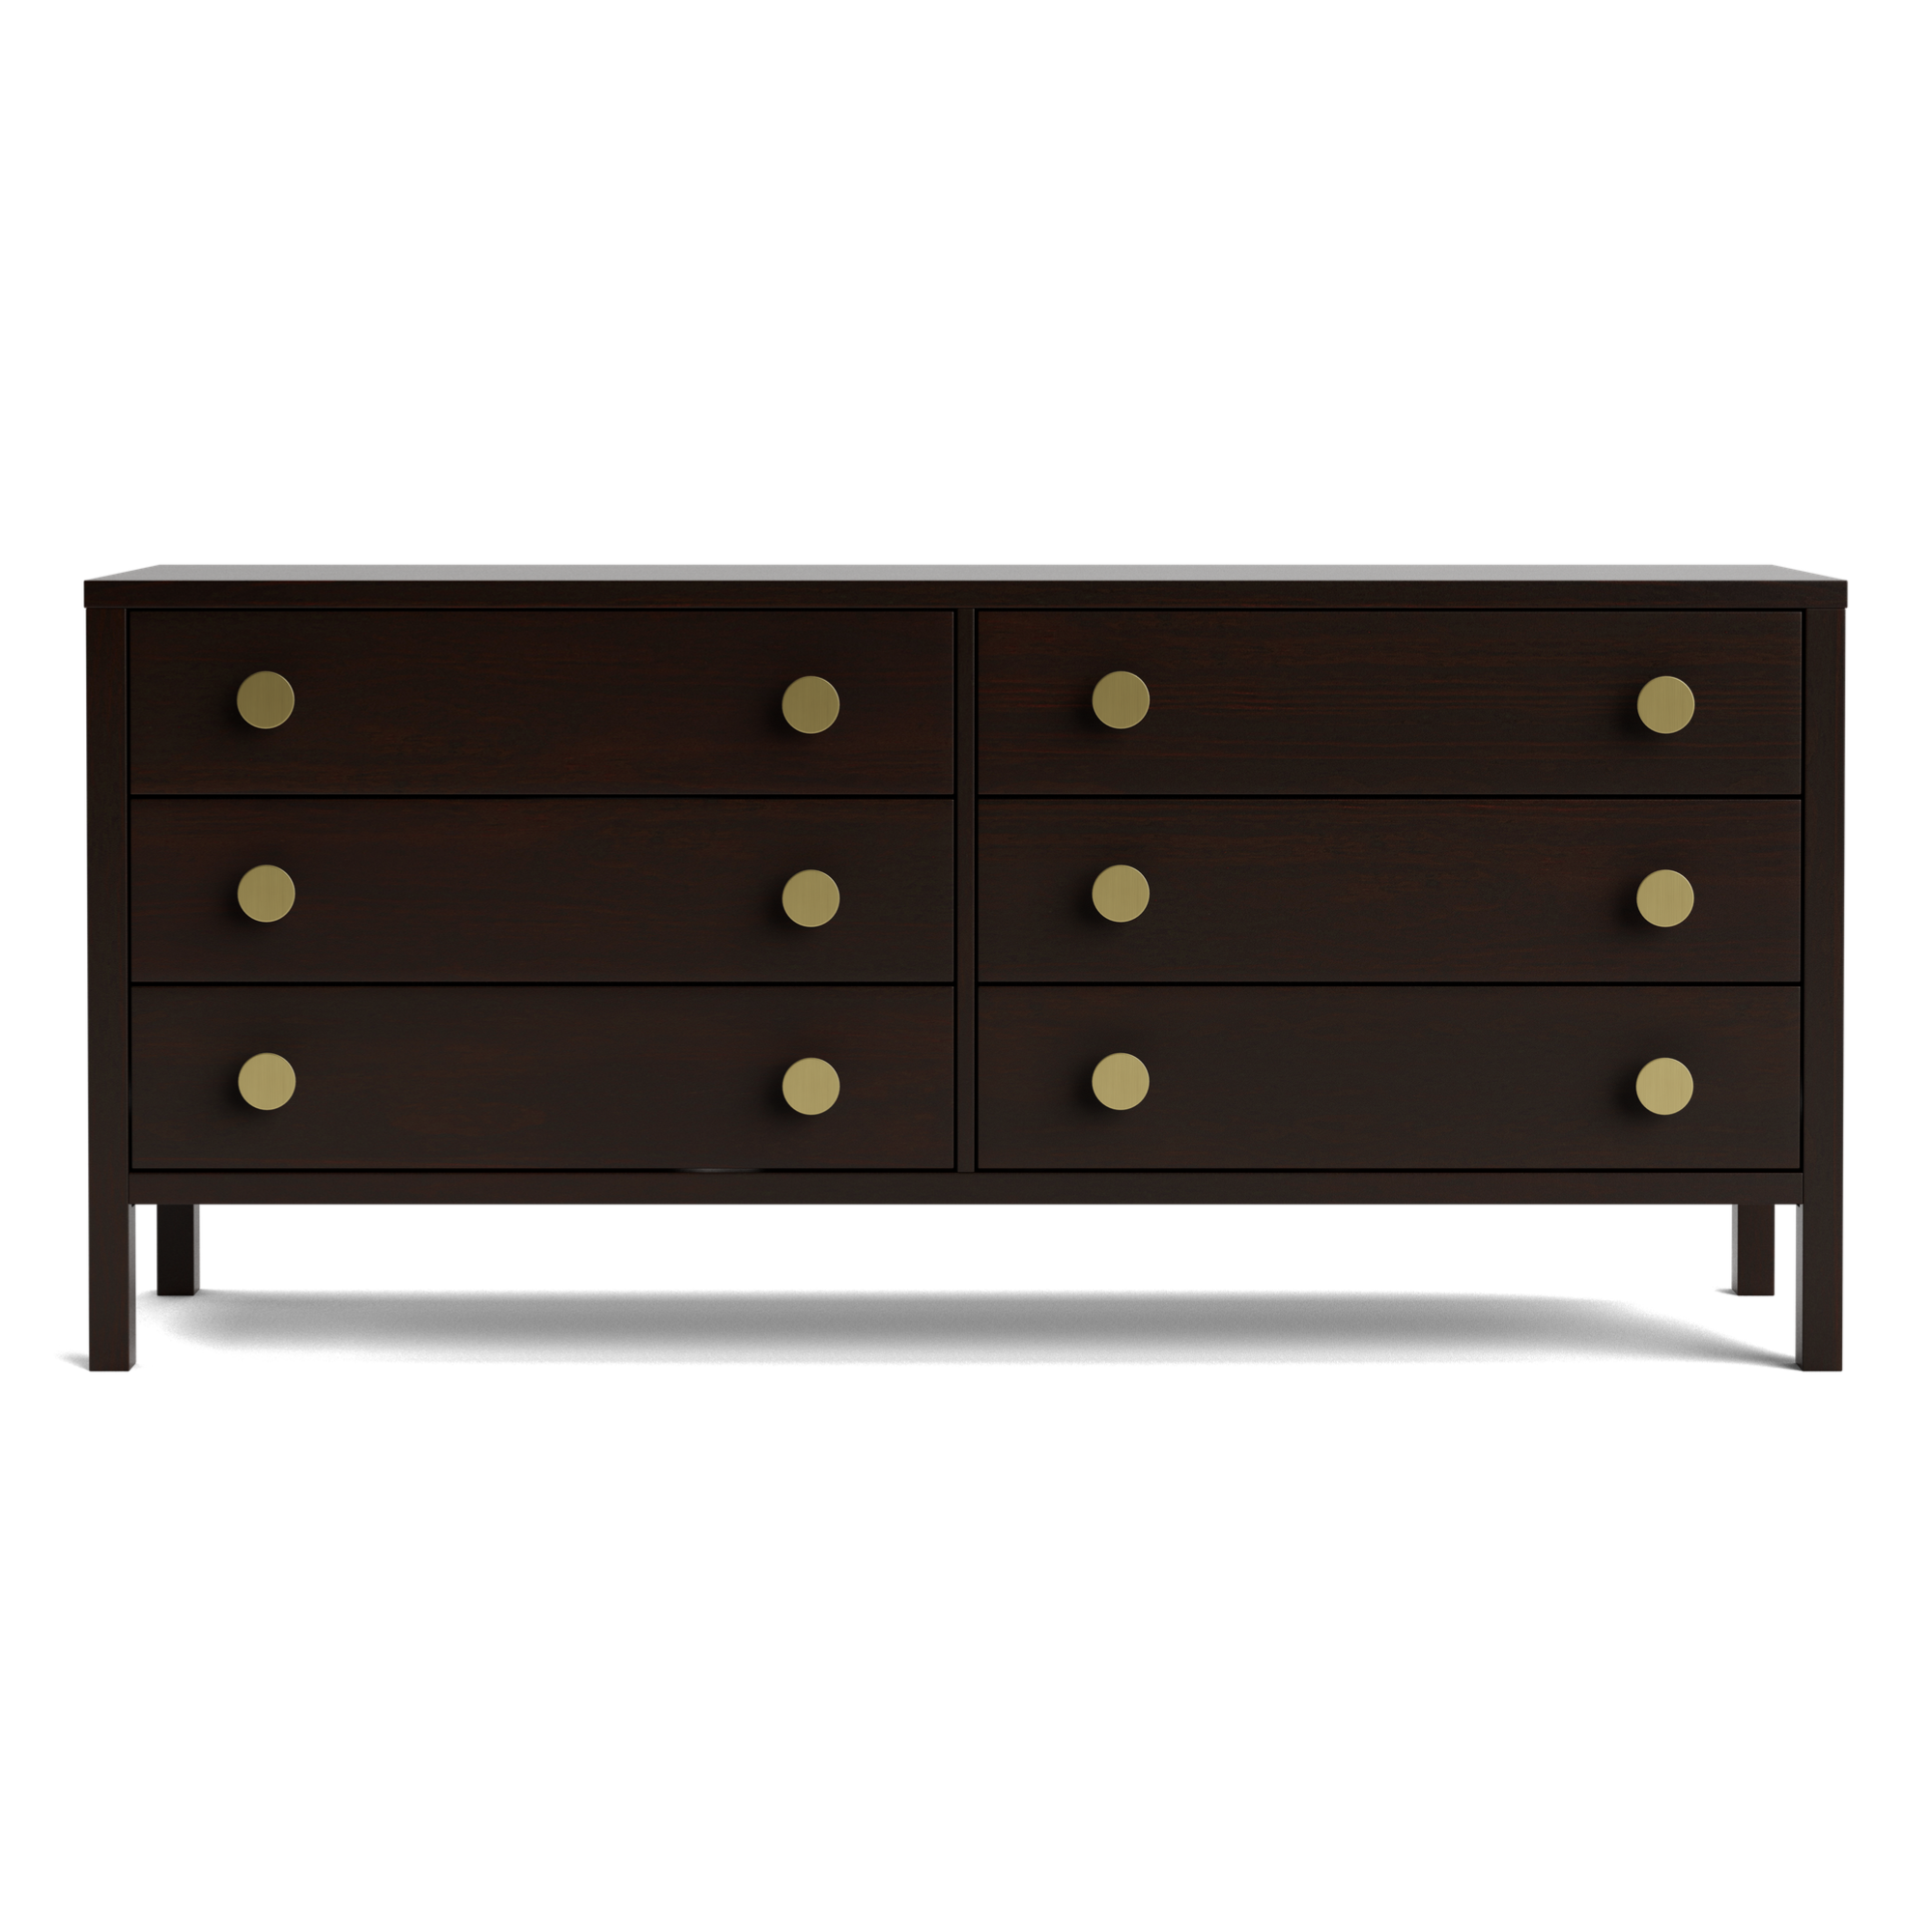 ANDES 6 DRAWER WIDE LOWBOY | NZ PINE OR AMERICAN ASH | NZ MADE